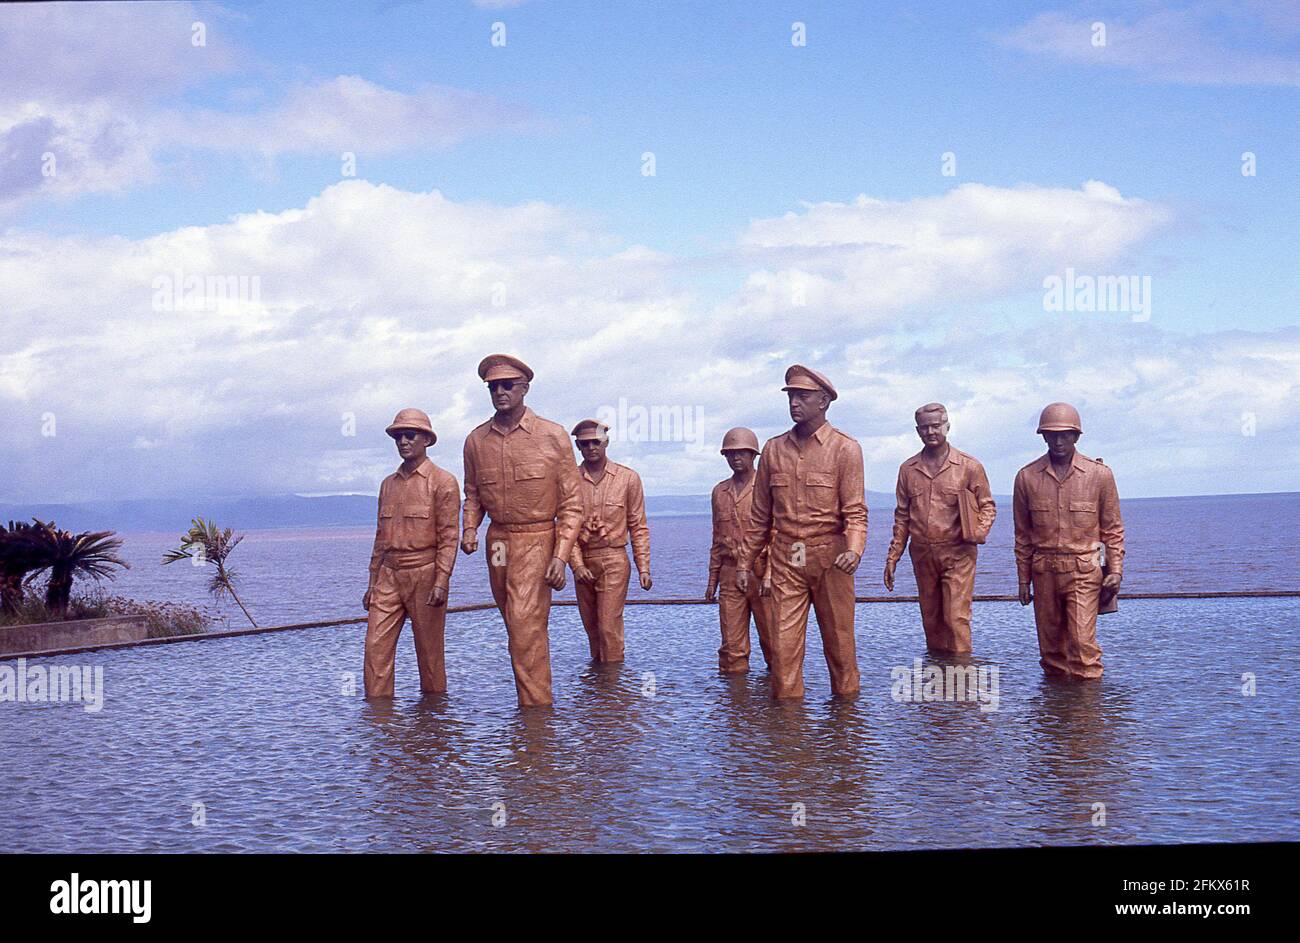 Statues of General Douglas and staff landing at Dulag Beach, Leyte Island, Visayas, Philippines Stock Photo